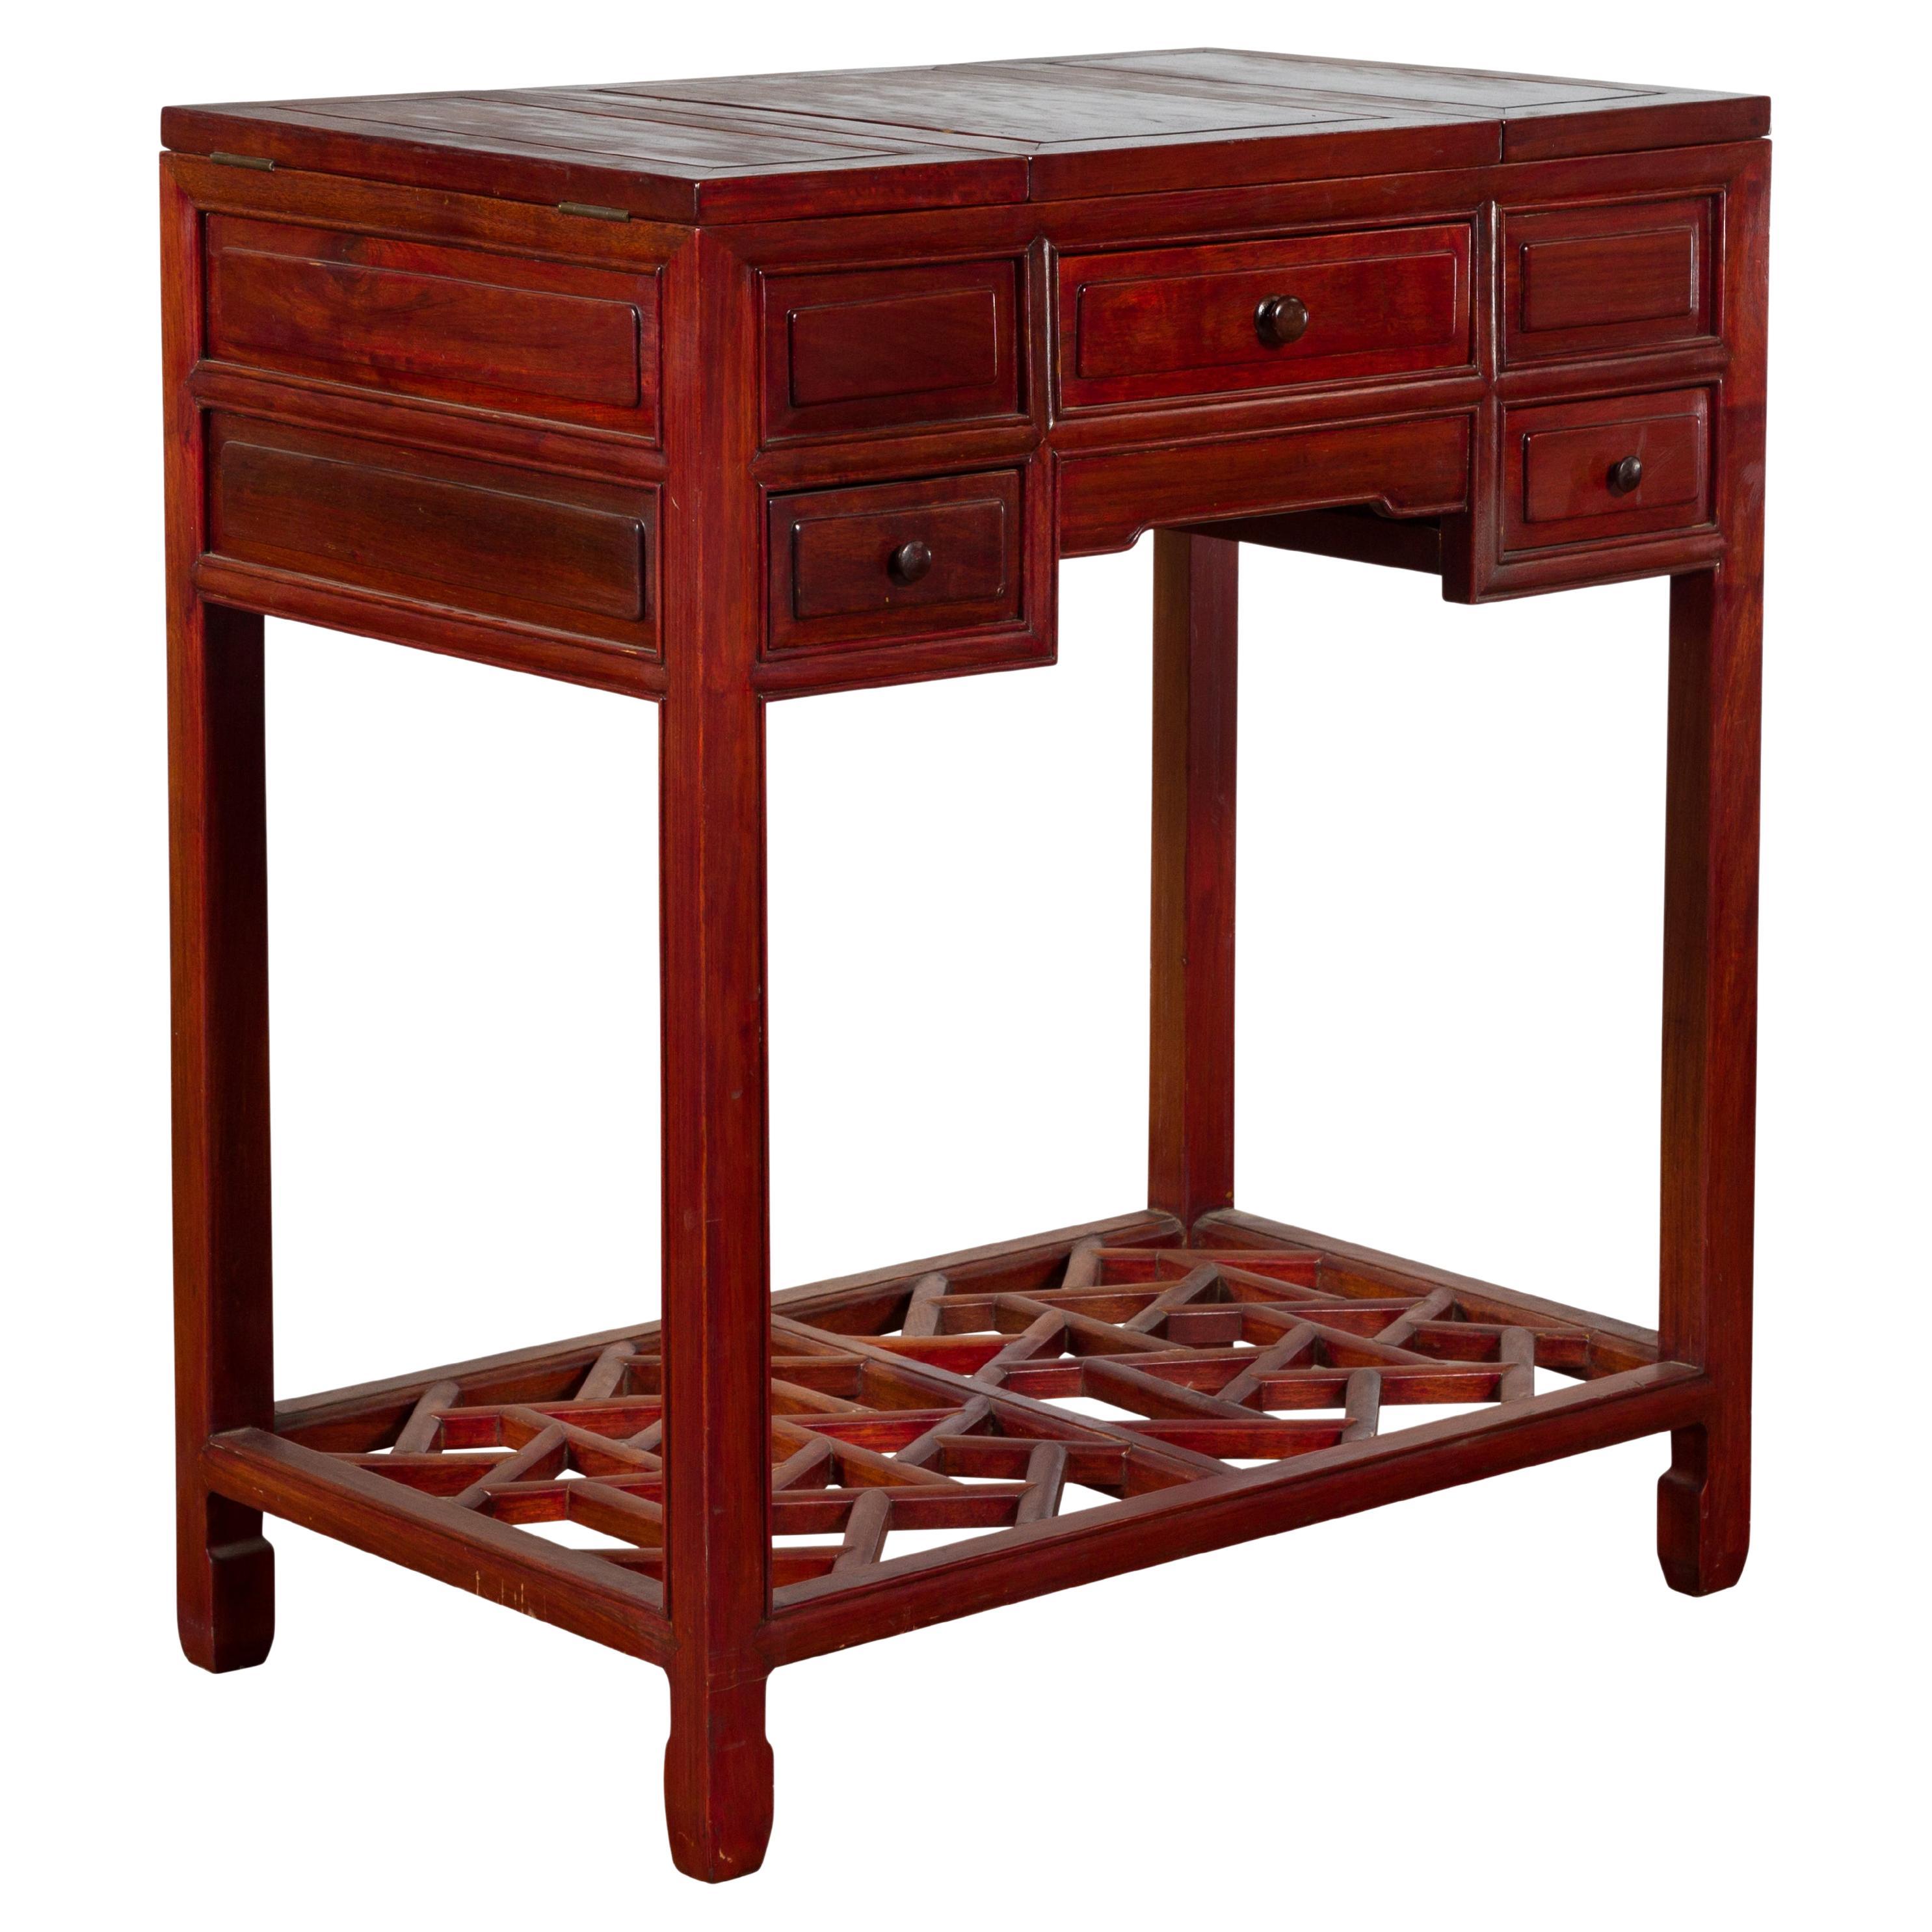 Chinese Vintage Red Lacquer Wood Three-Drawer Vanity Table with Folding Mirror